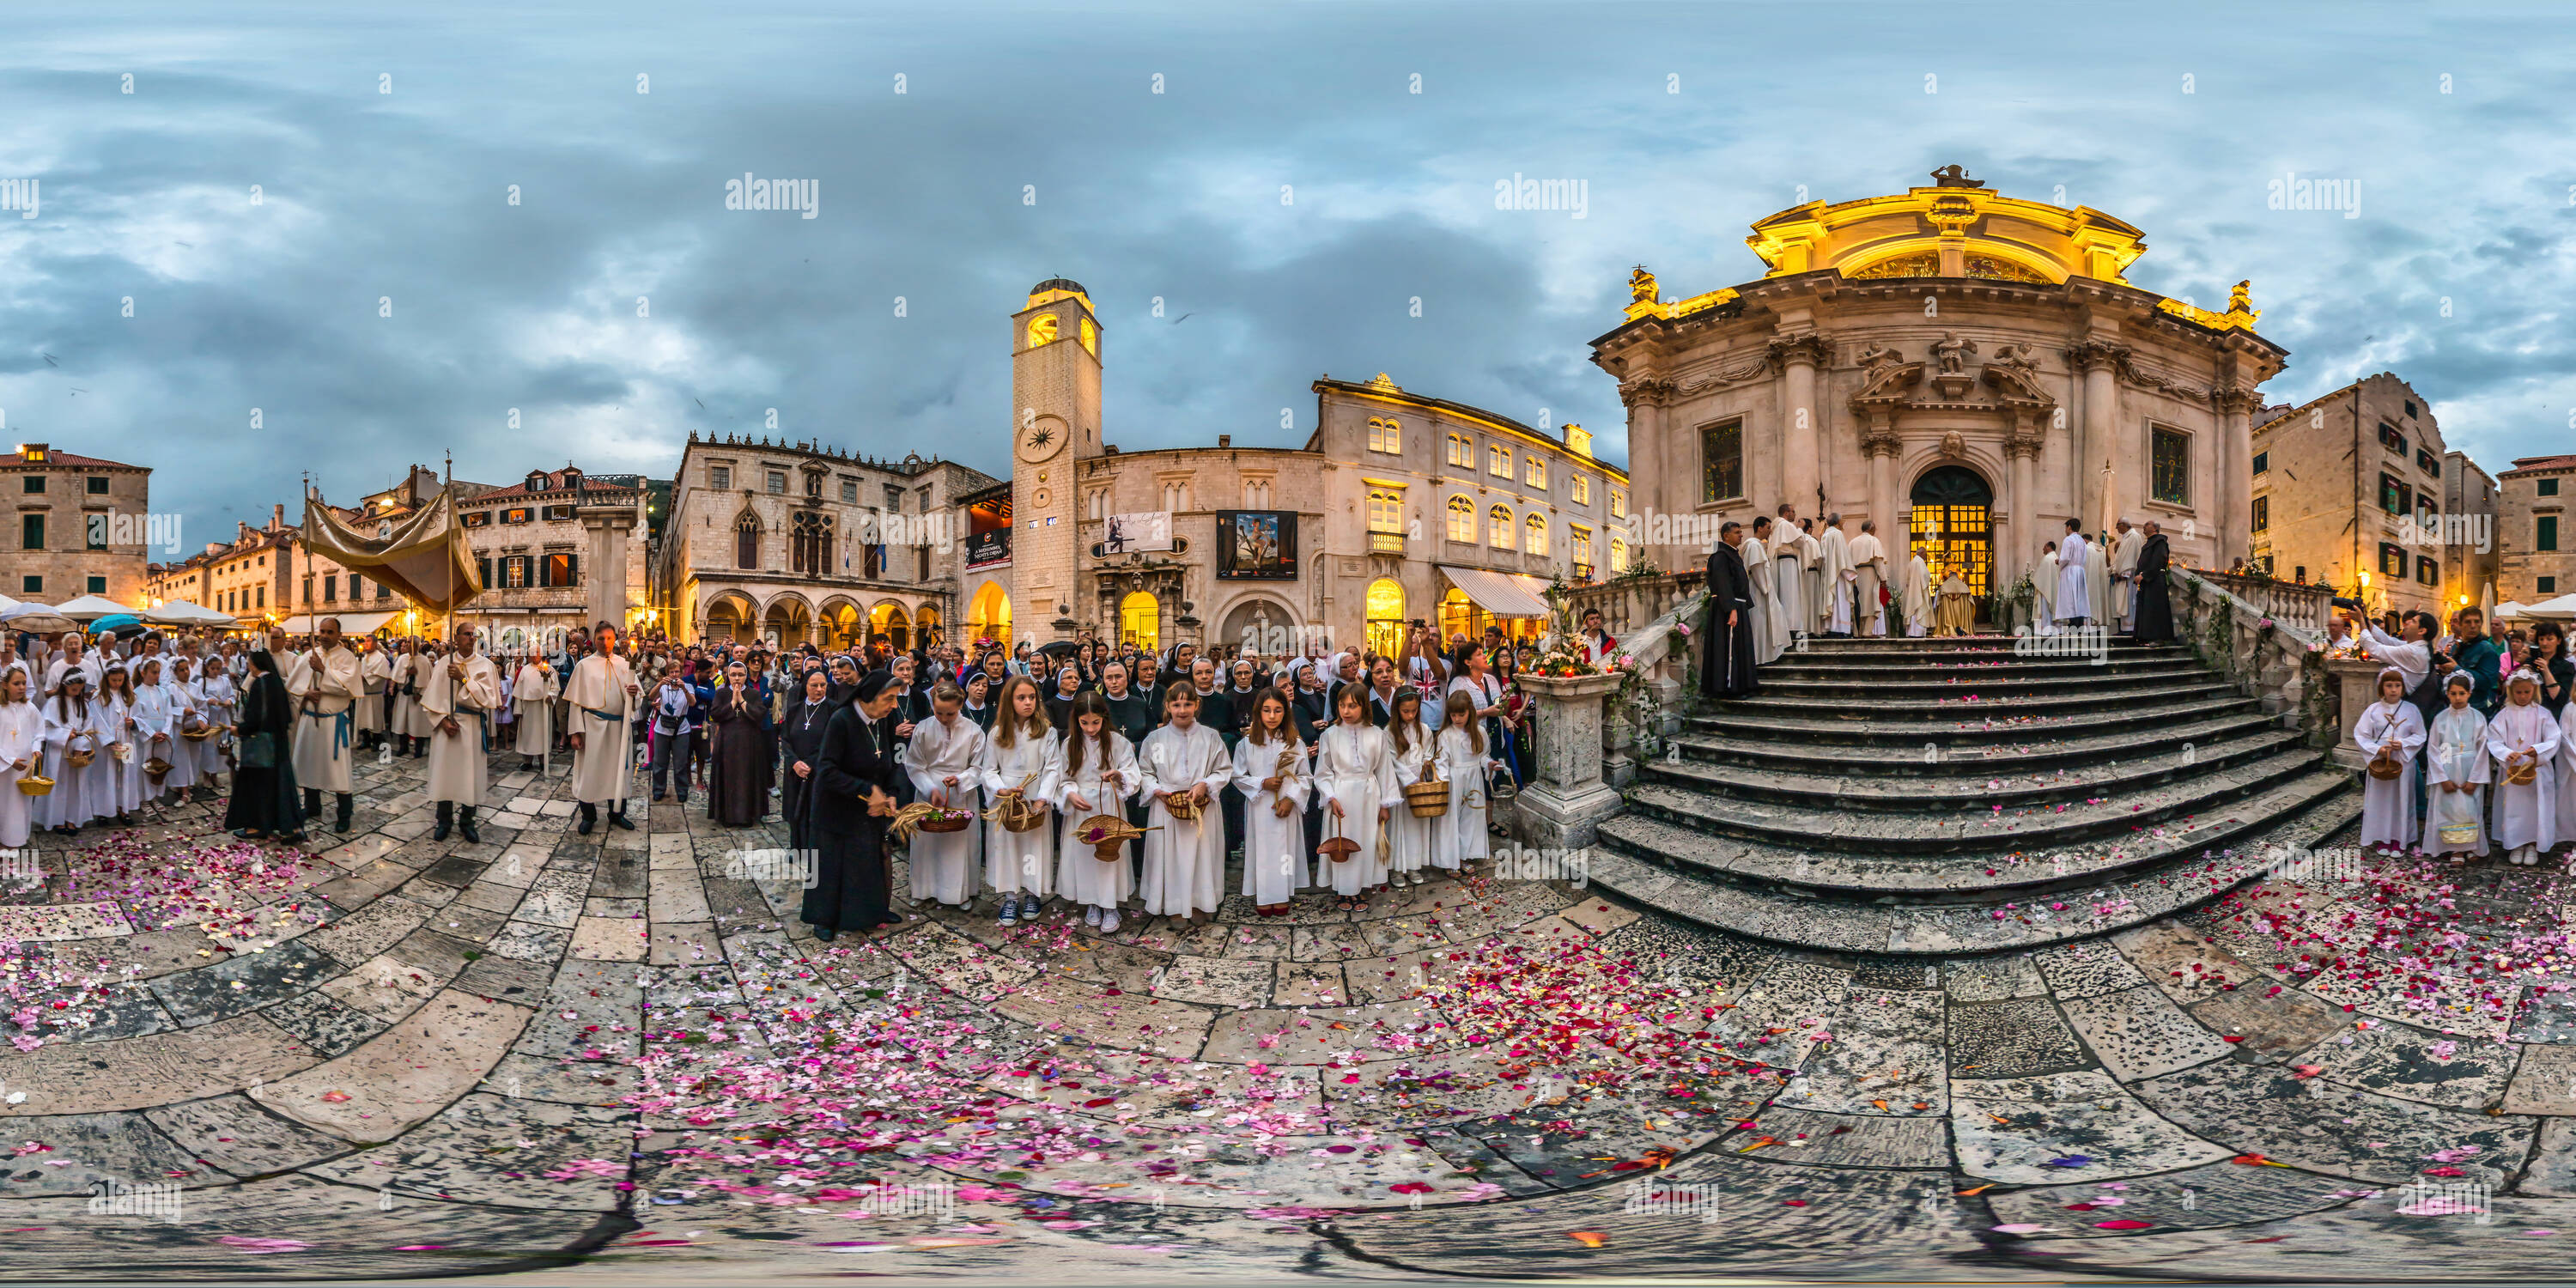 360 degree panoramic view of The Feast of Corpus Christi 2014.